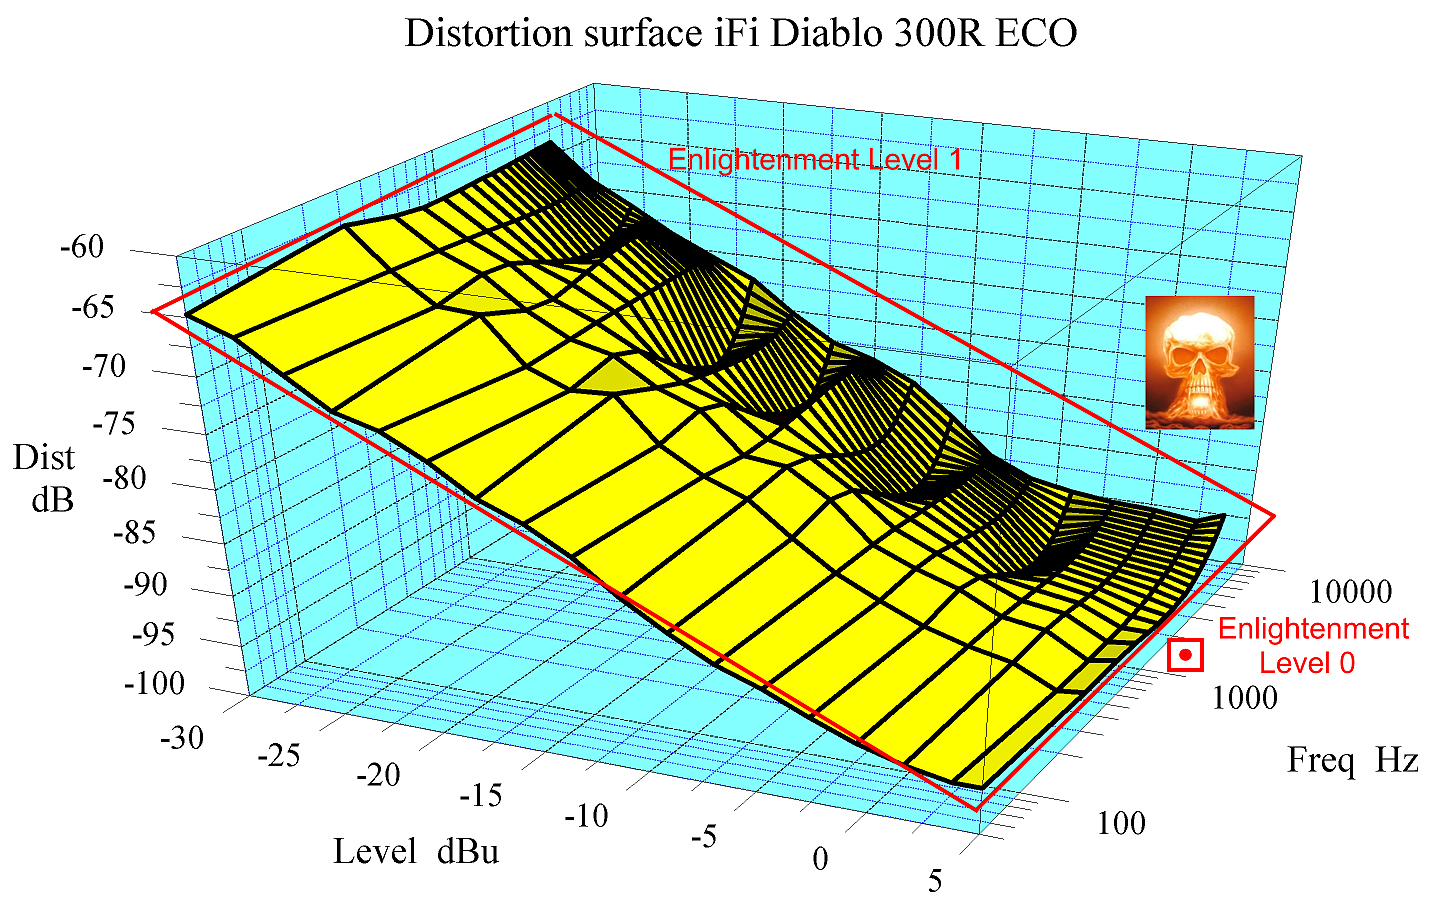 Distortion surface iFi Diablo 300R ECO 5 dBu max annotated small.png